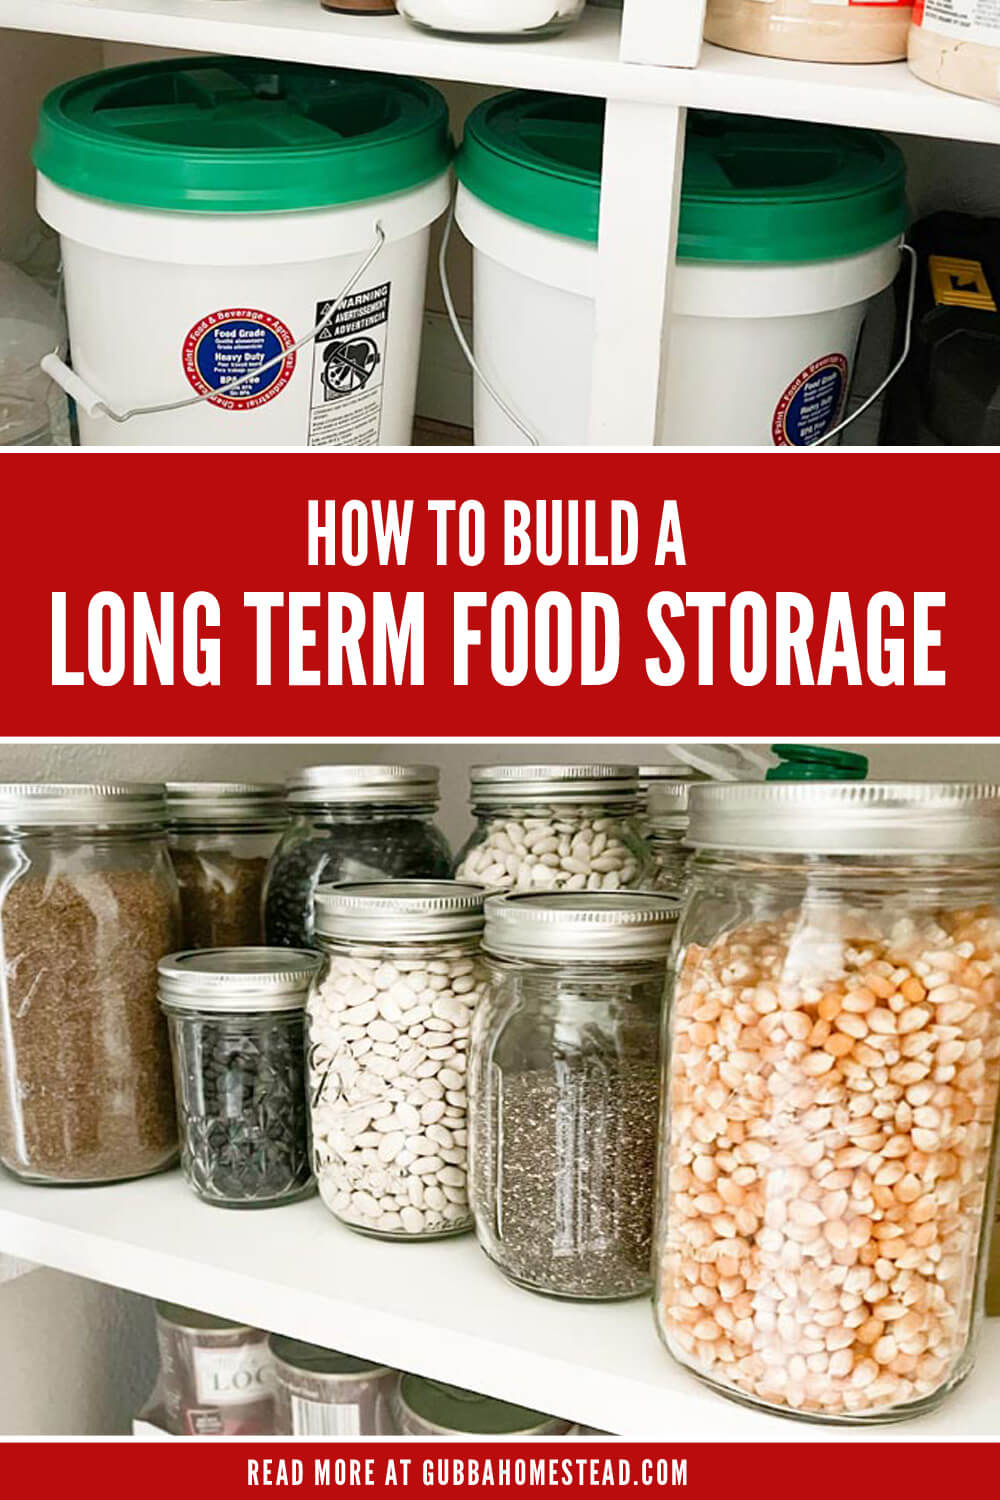 How To Build a Long Term Food Storage